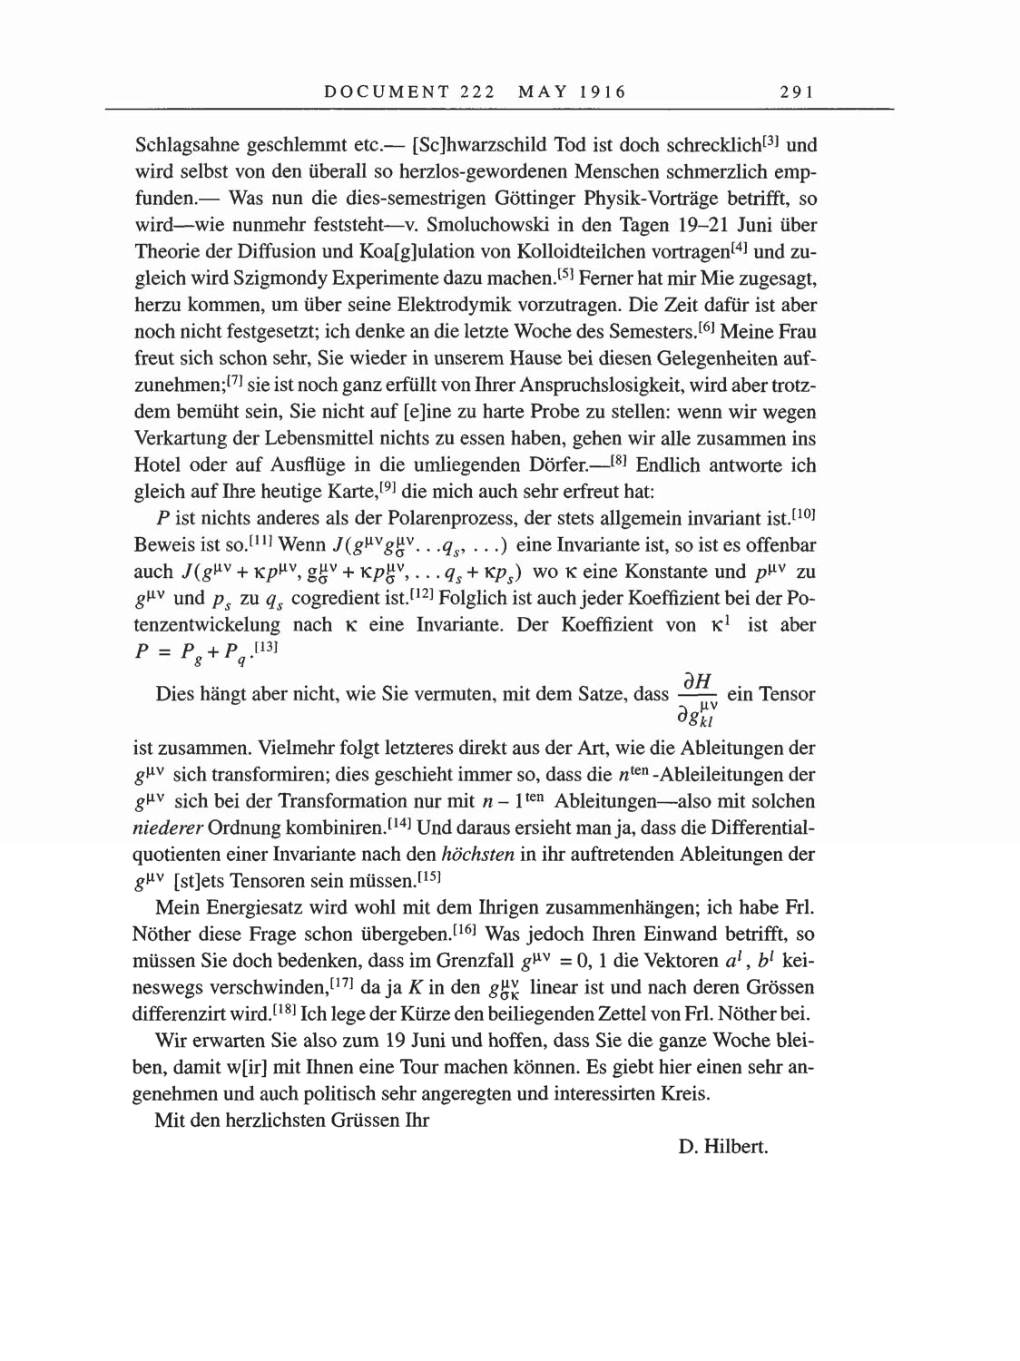 Volume 8, Part A: The Berlin Years: Correspondence 1914-1917 page 291